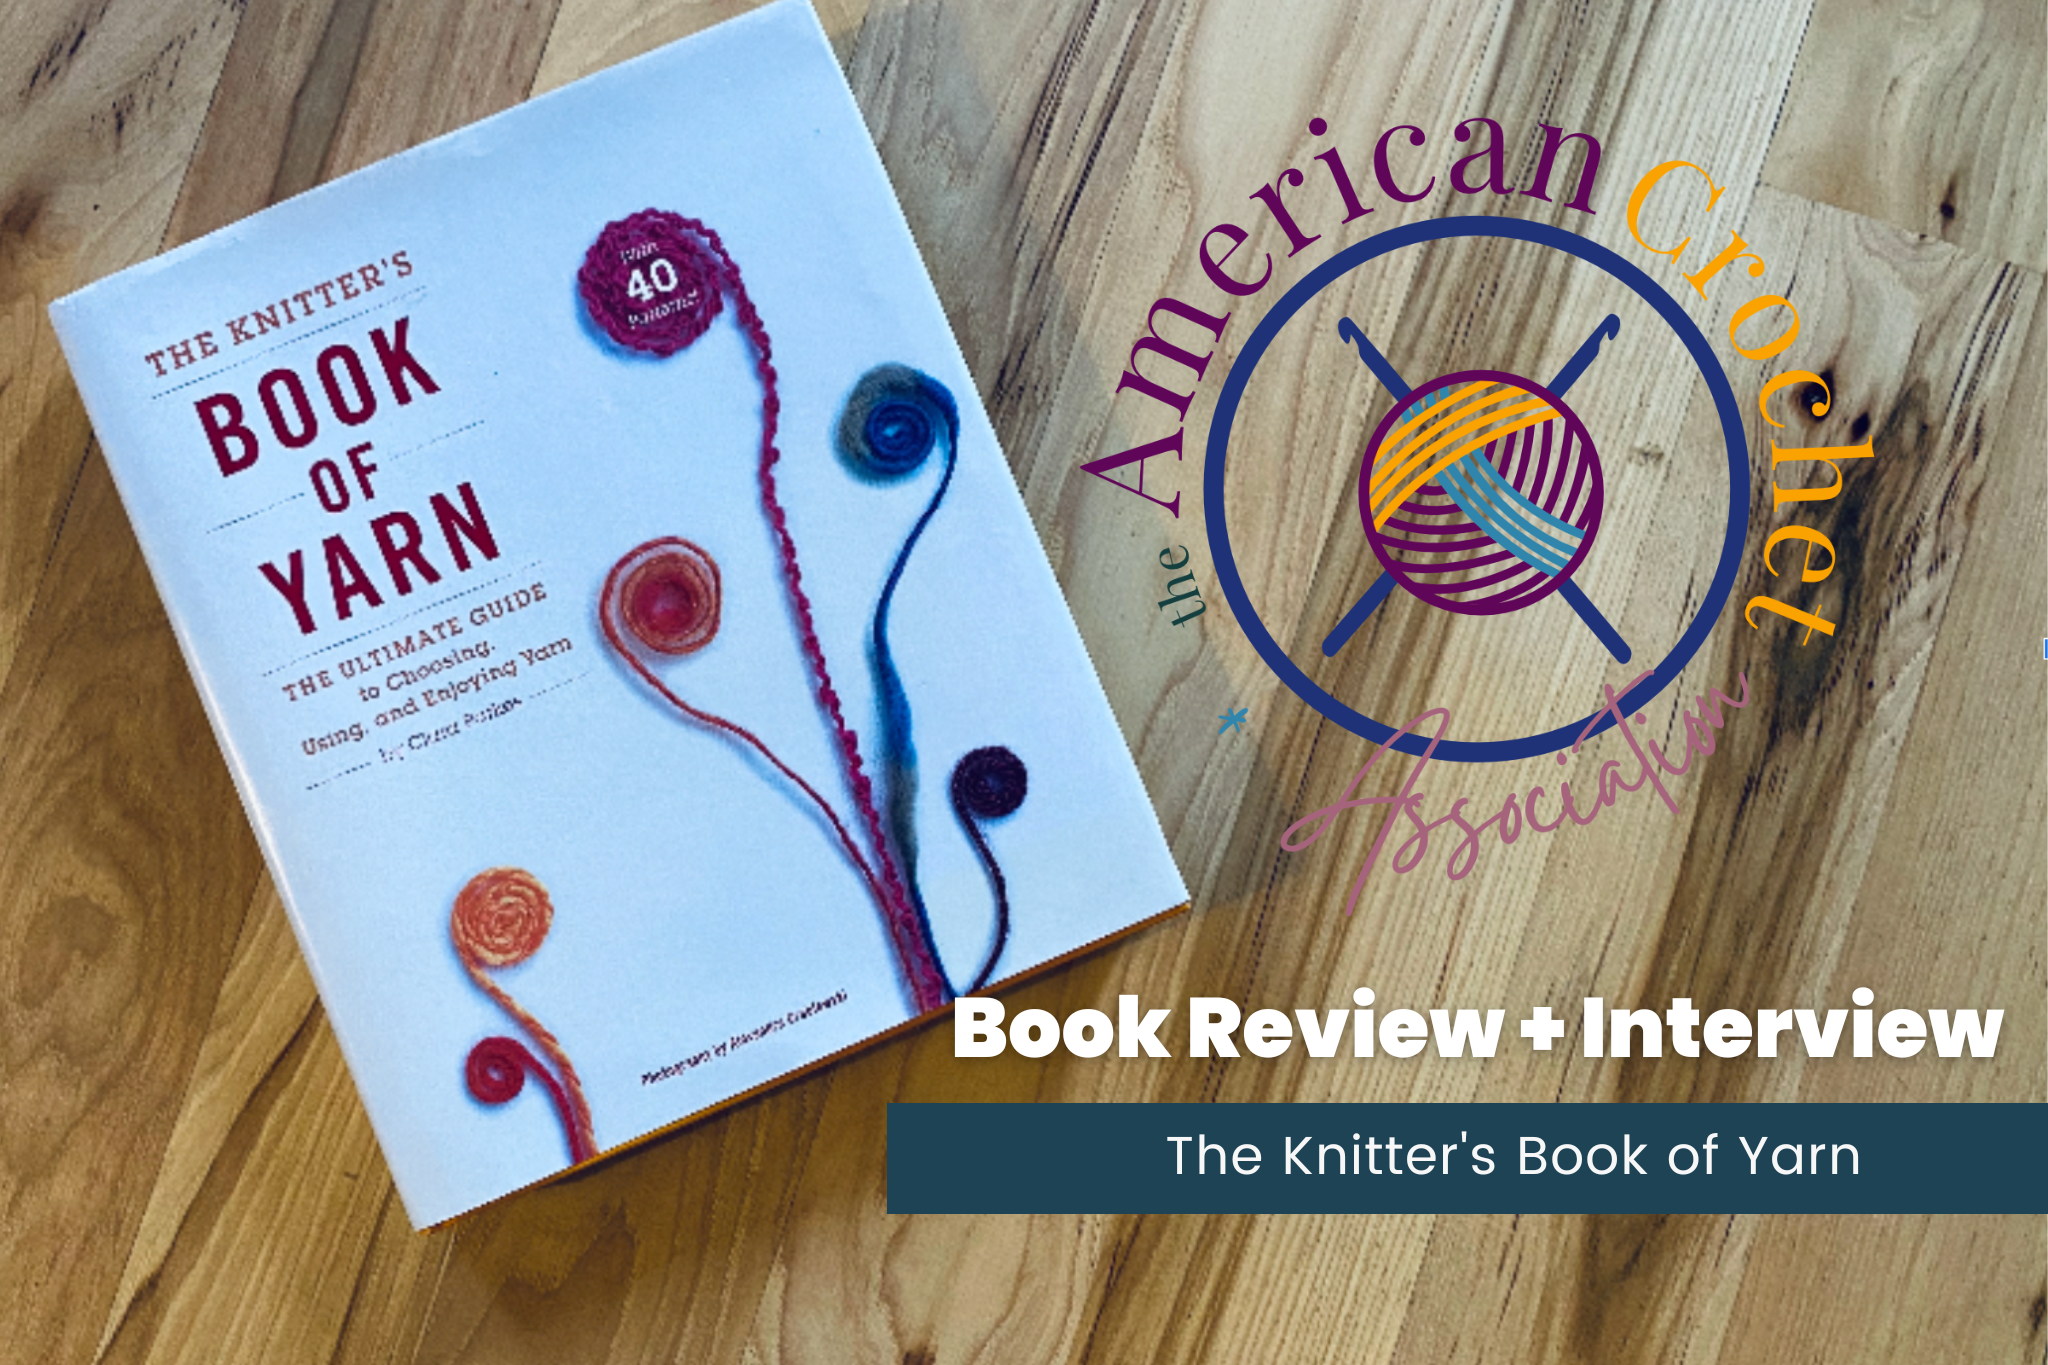 The Knitter’s Book of Yarn: Review and Author Interview